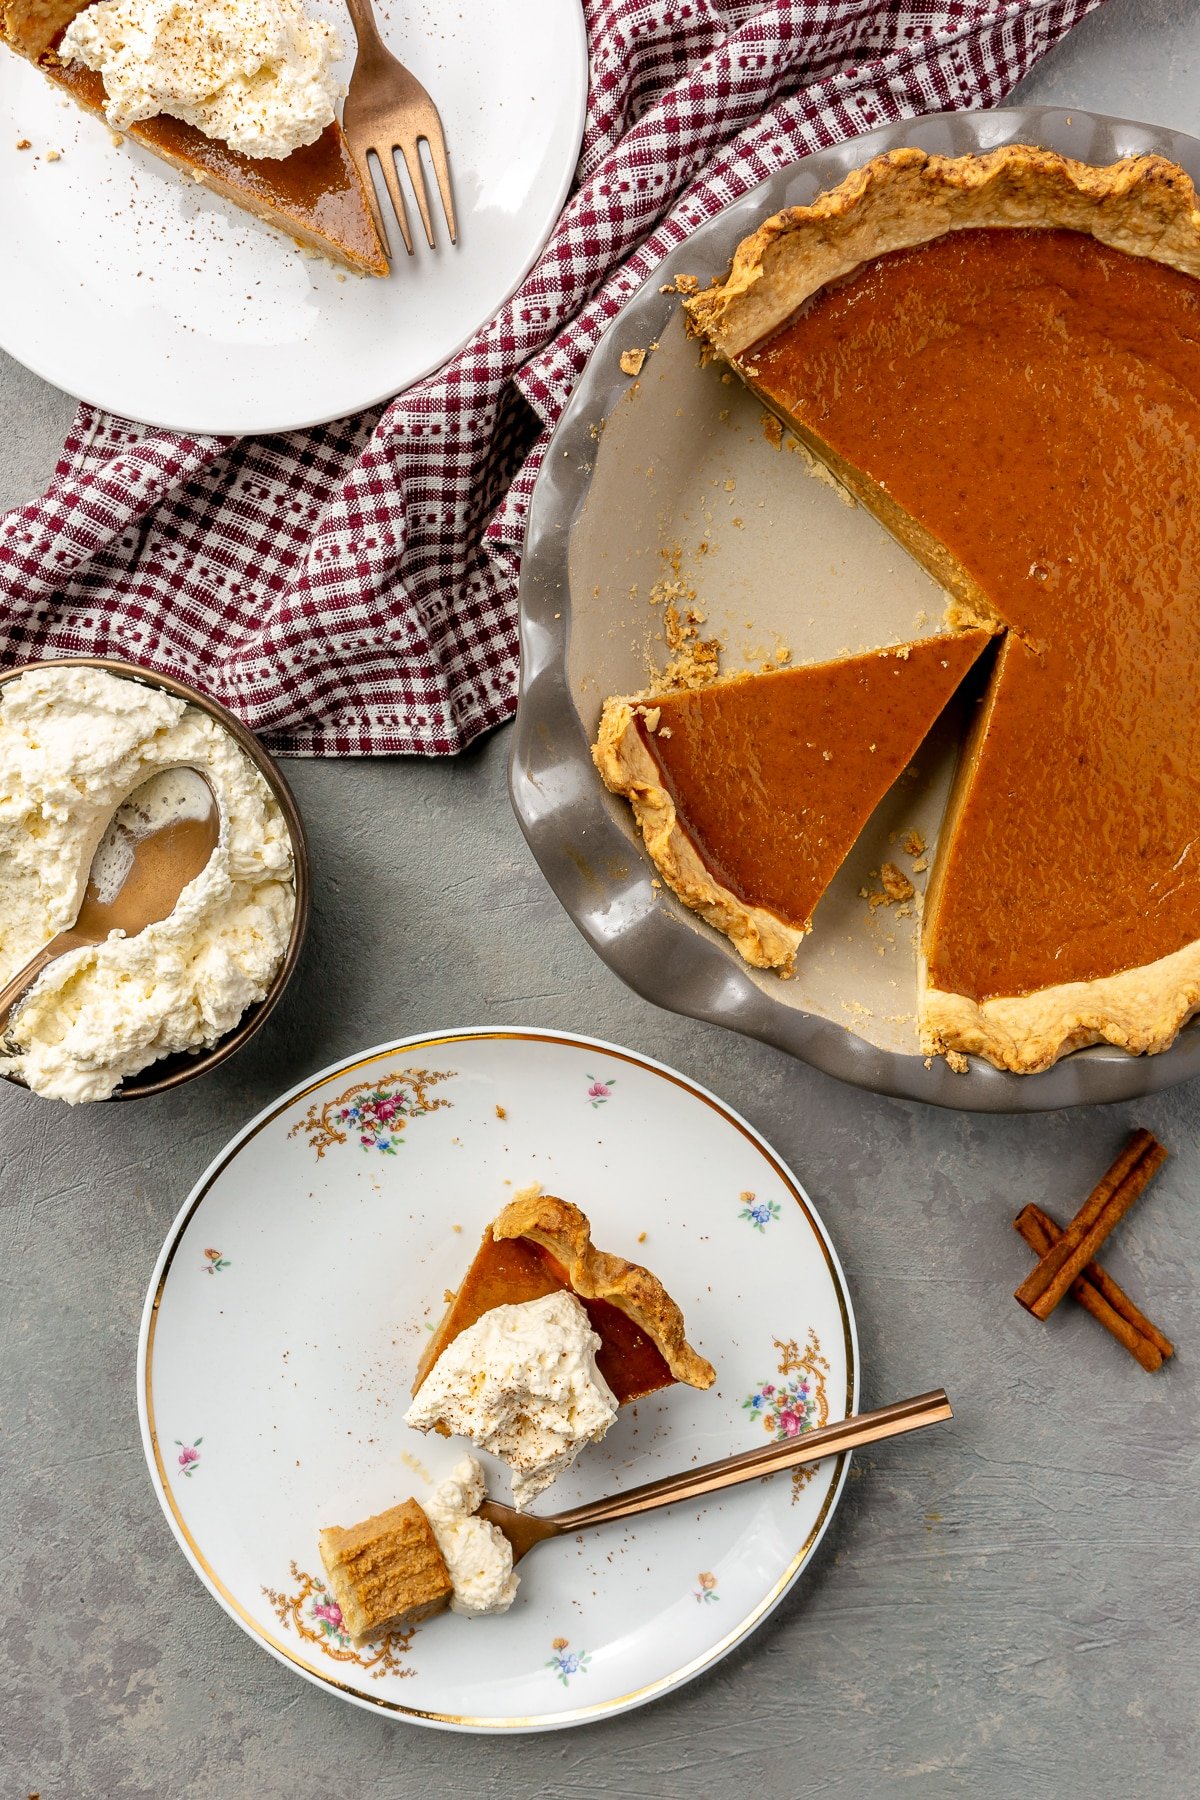 Two slices of pie, one with a bite removed, have been removed and paces on white plates with a copper fork. The remaining pie, whipped cream, and cinnamon sit to the side.